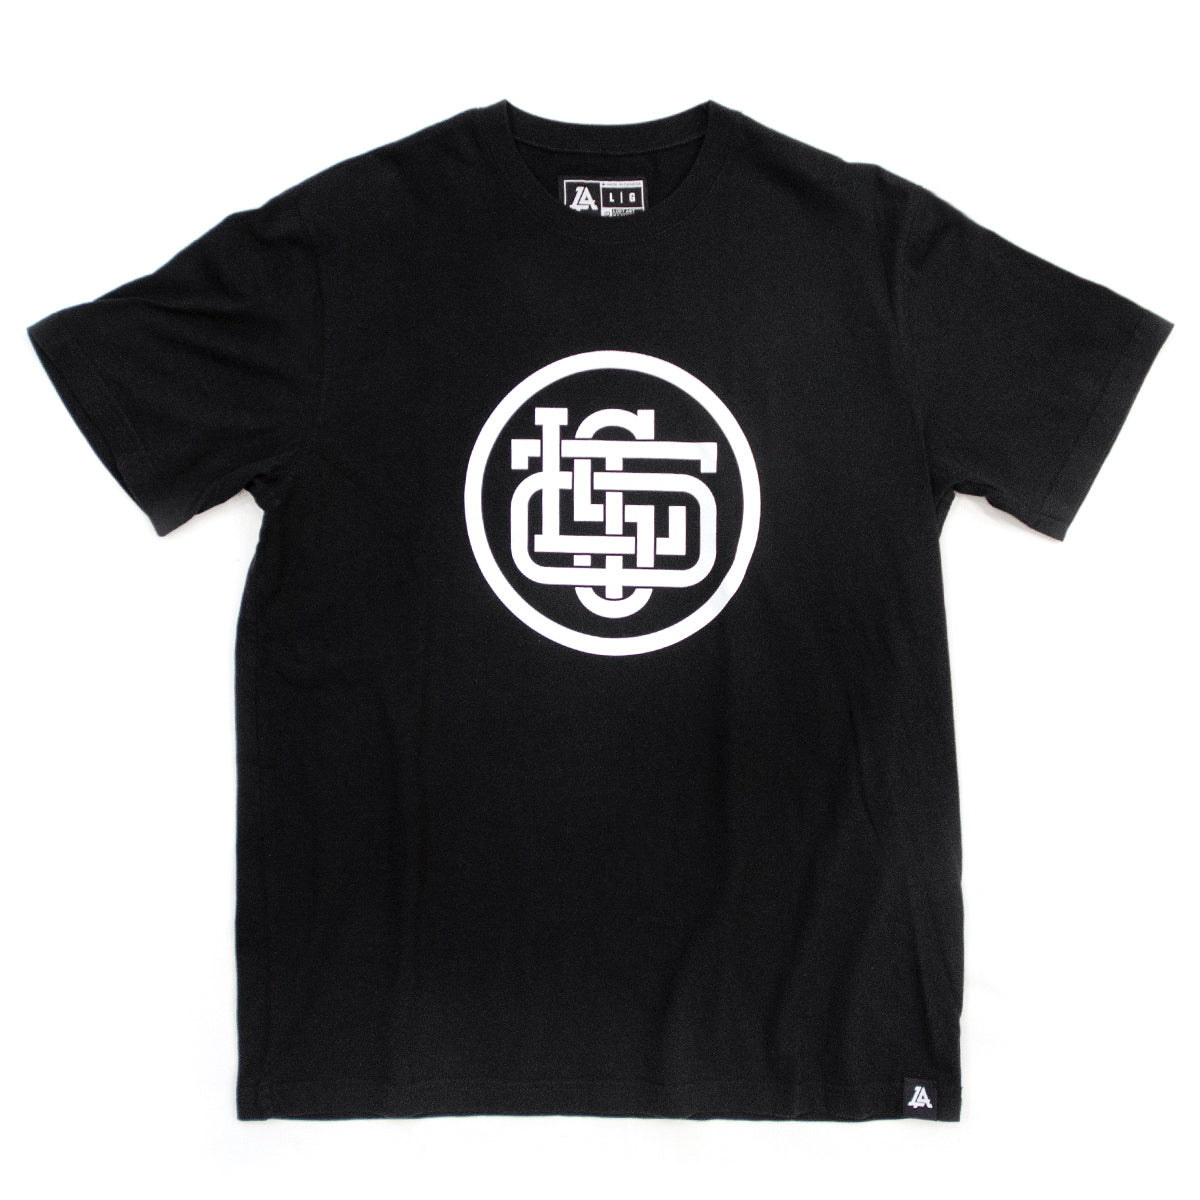 Lost Art Canada - white on black monogram logo tee front view